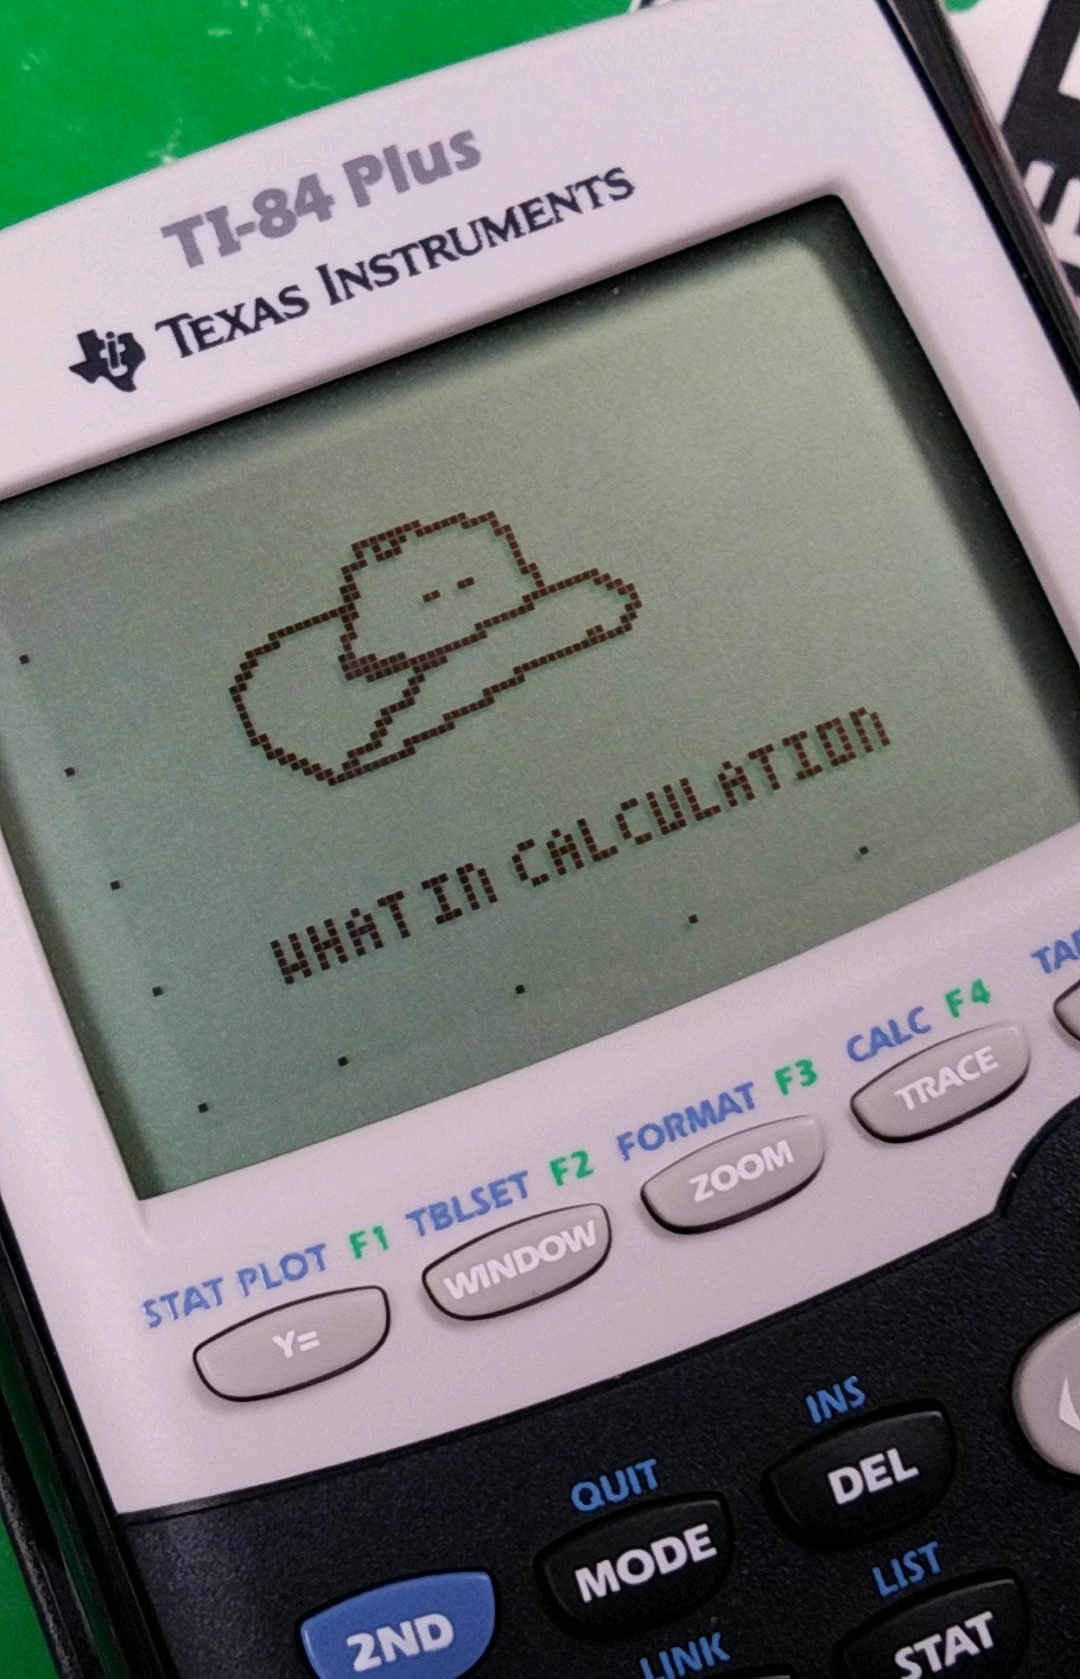 memes - texas instruments ti 84 plus - Ti84 Plus Texas Instruments What In Calculation Trace Window Czoom Stat Plot F1 Tblset F2 Format F3 Calc F4 2 Ys Ins Del Mode Del Quit Mode 2ND 2ND Link Stat